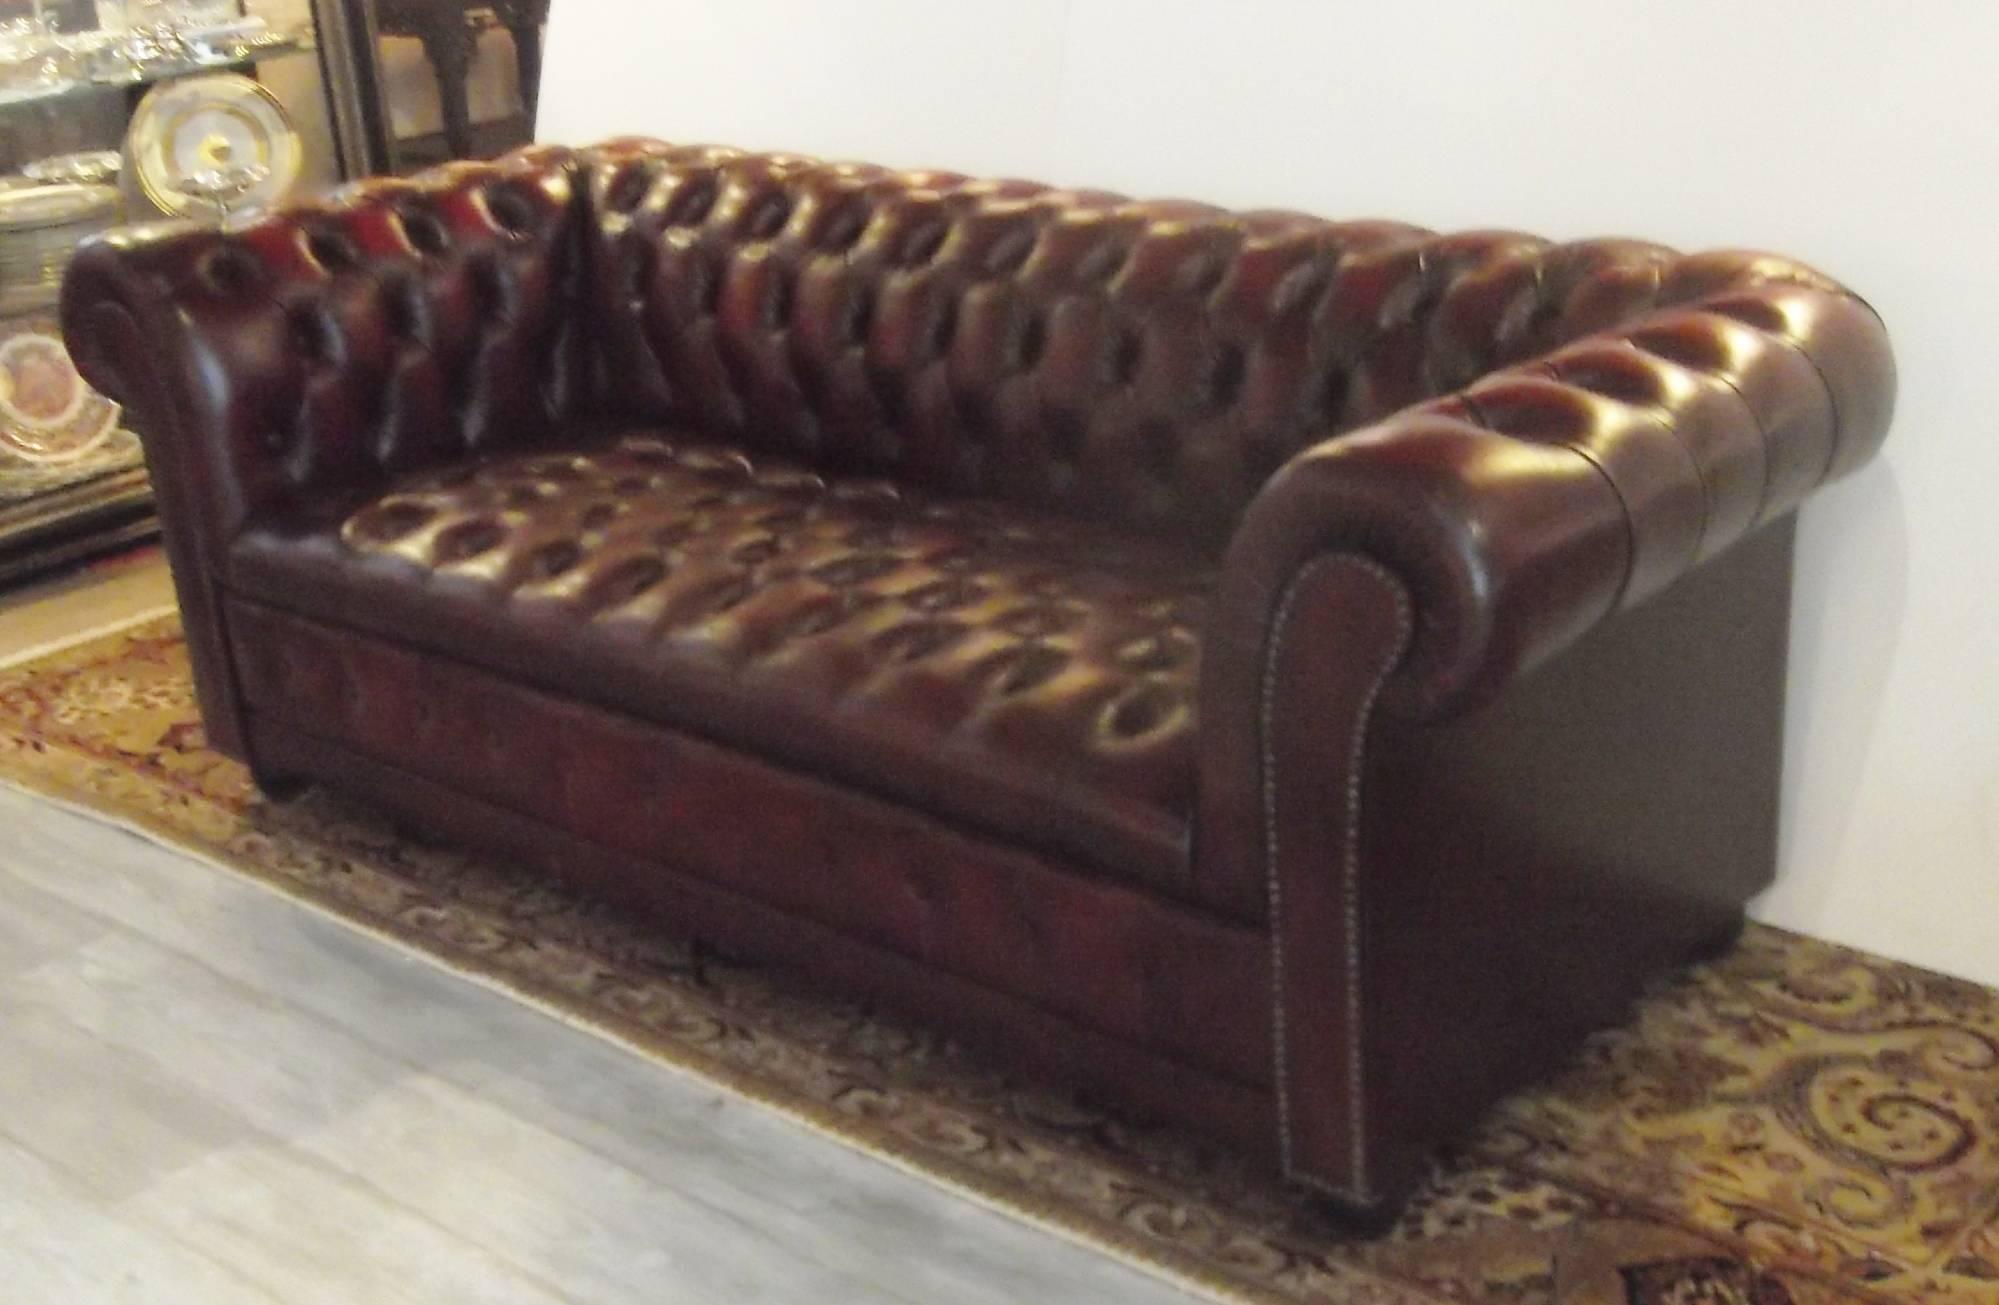 A Classic button tufted Chesterfield sofa with nailhead trim.
Cordovan leather with a slight worn finish, no rips or tears, all buttons neatly in place. 76